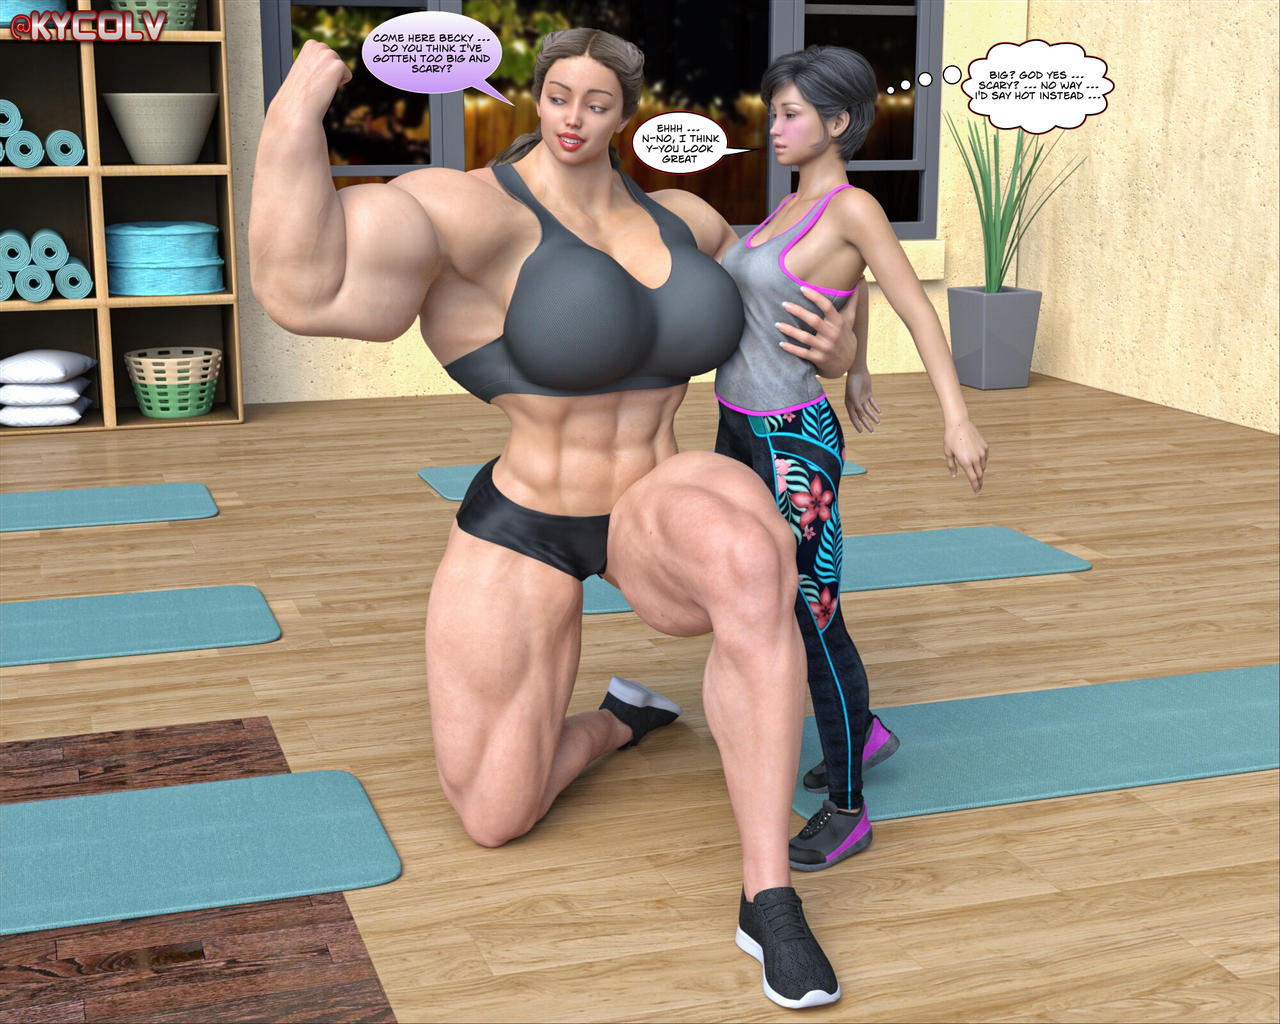 kycolv on X: Big Woman here a pic a posted a while go on Patreon. Hope you  like it :D #tallwoman #strongwoman #strongarms #stronglegs #breastexpansion  #musclewoman #strongwoman #muscle #amazon #hugewoman #domination  #dominantgirl #